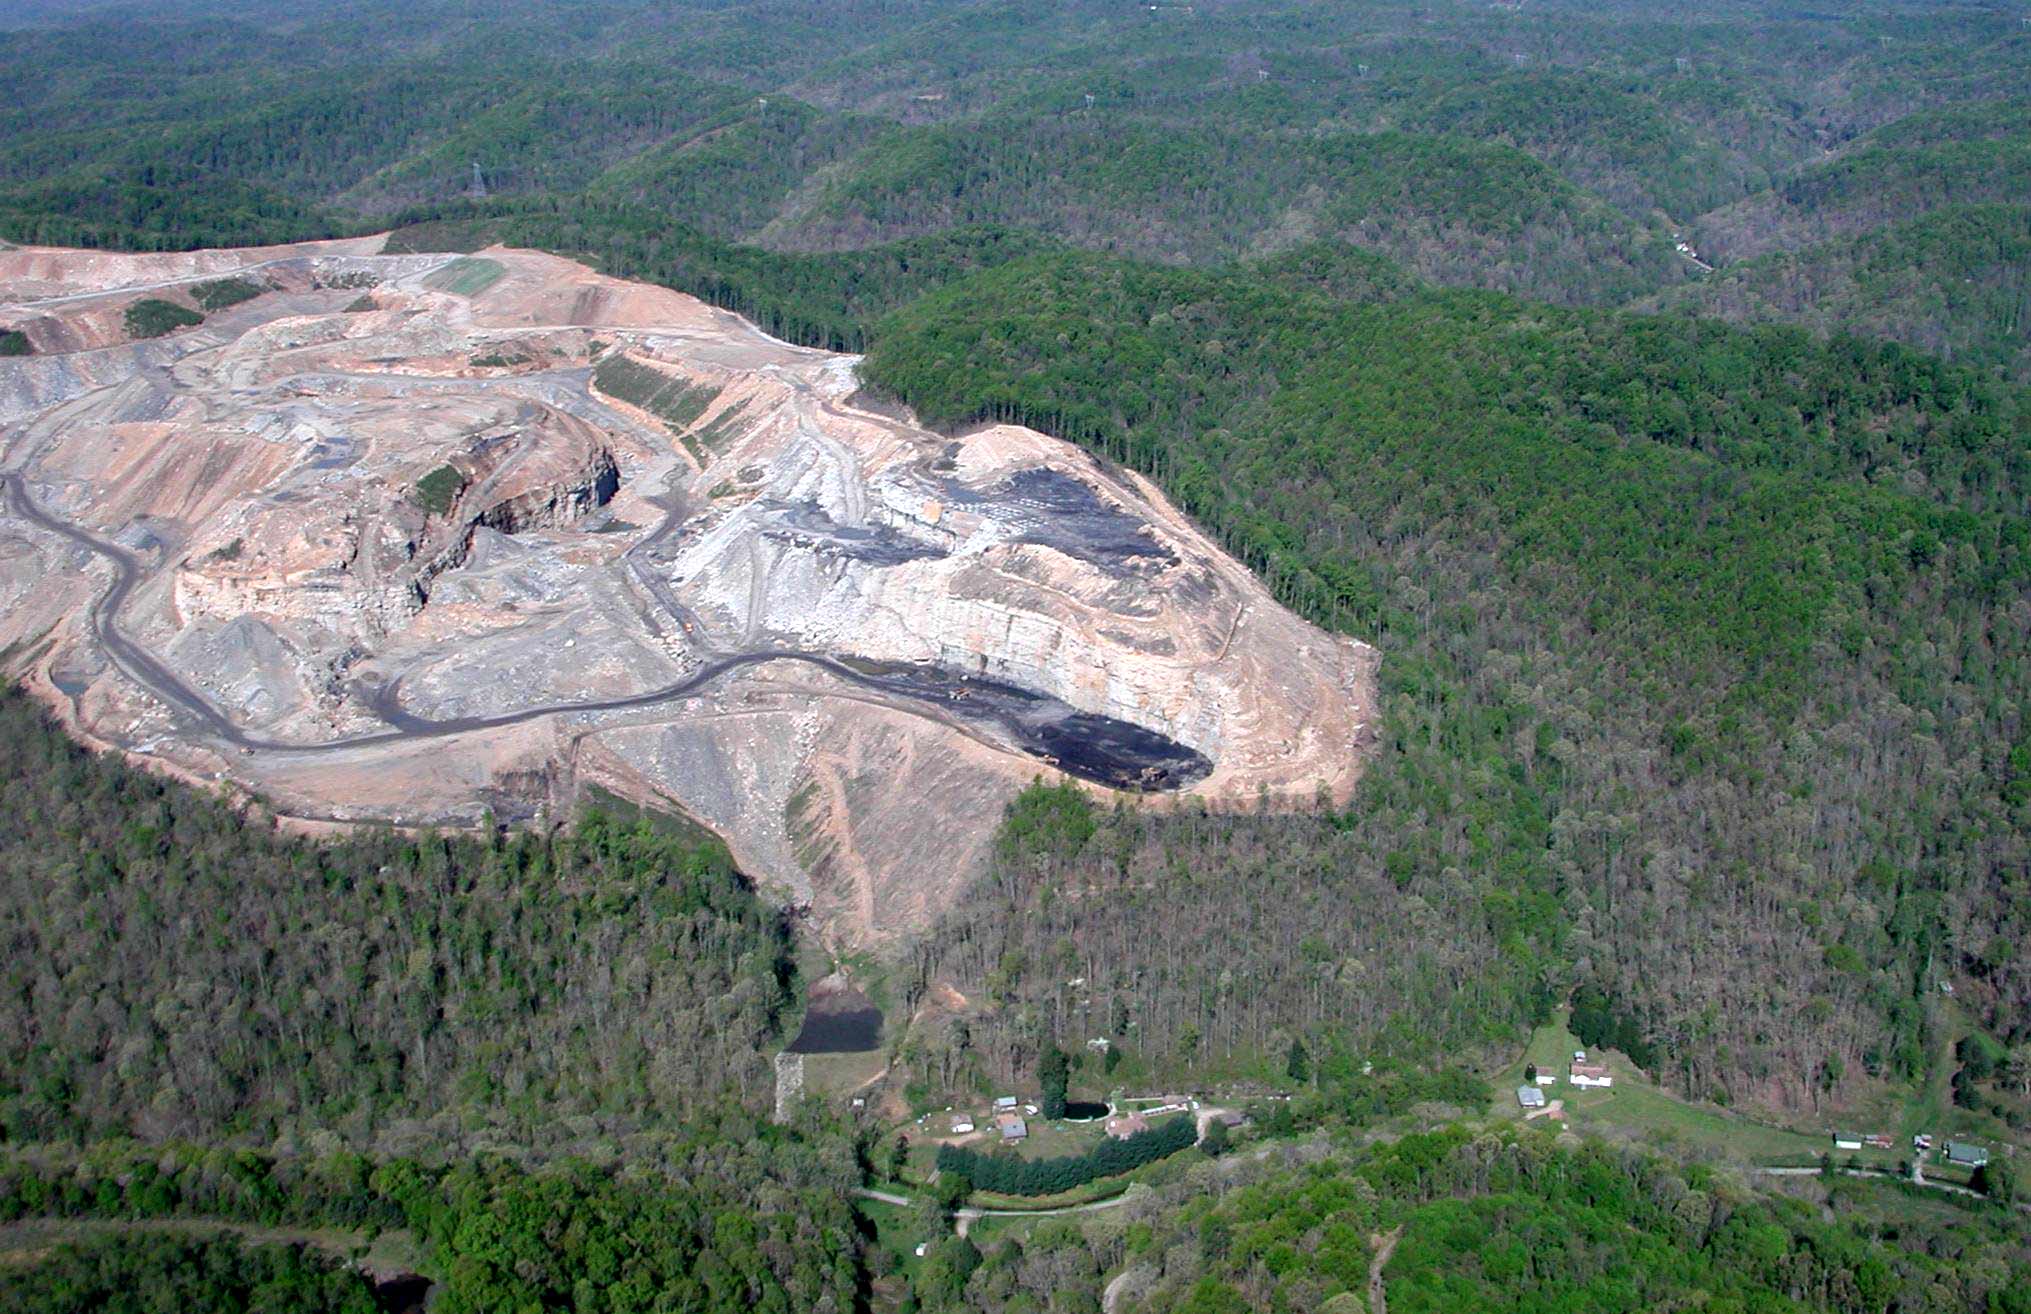 mountaintop removal coal mine
              in southern WV